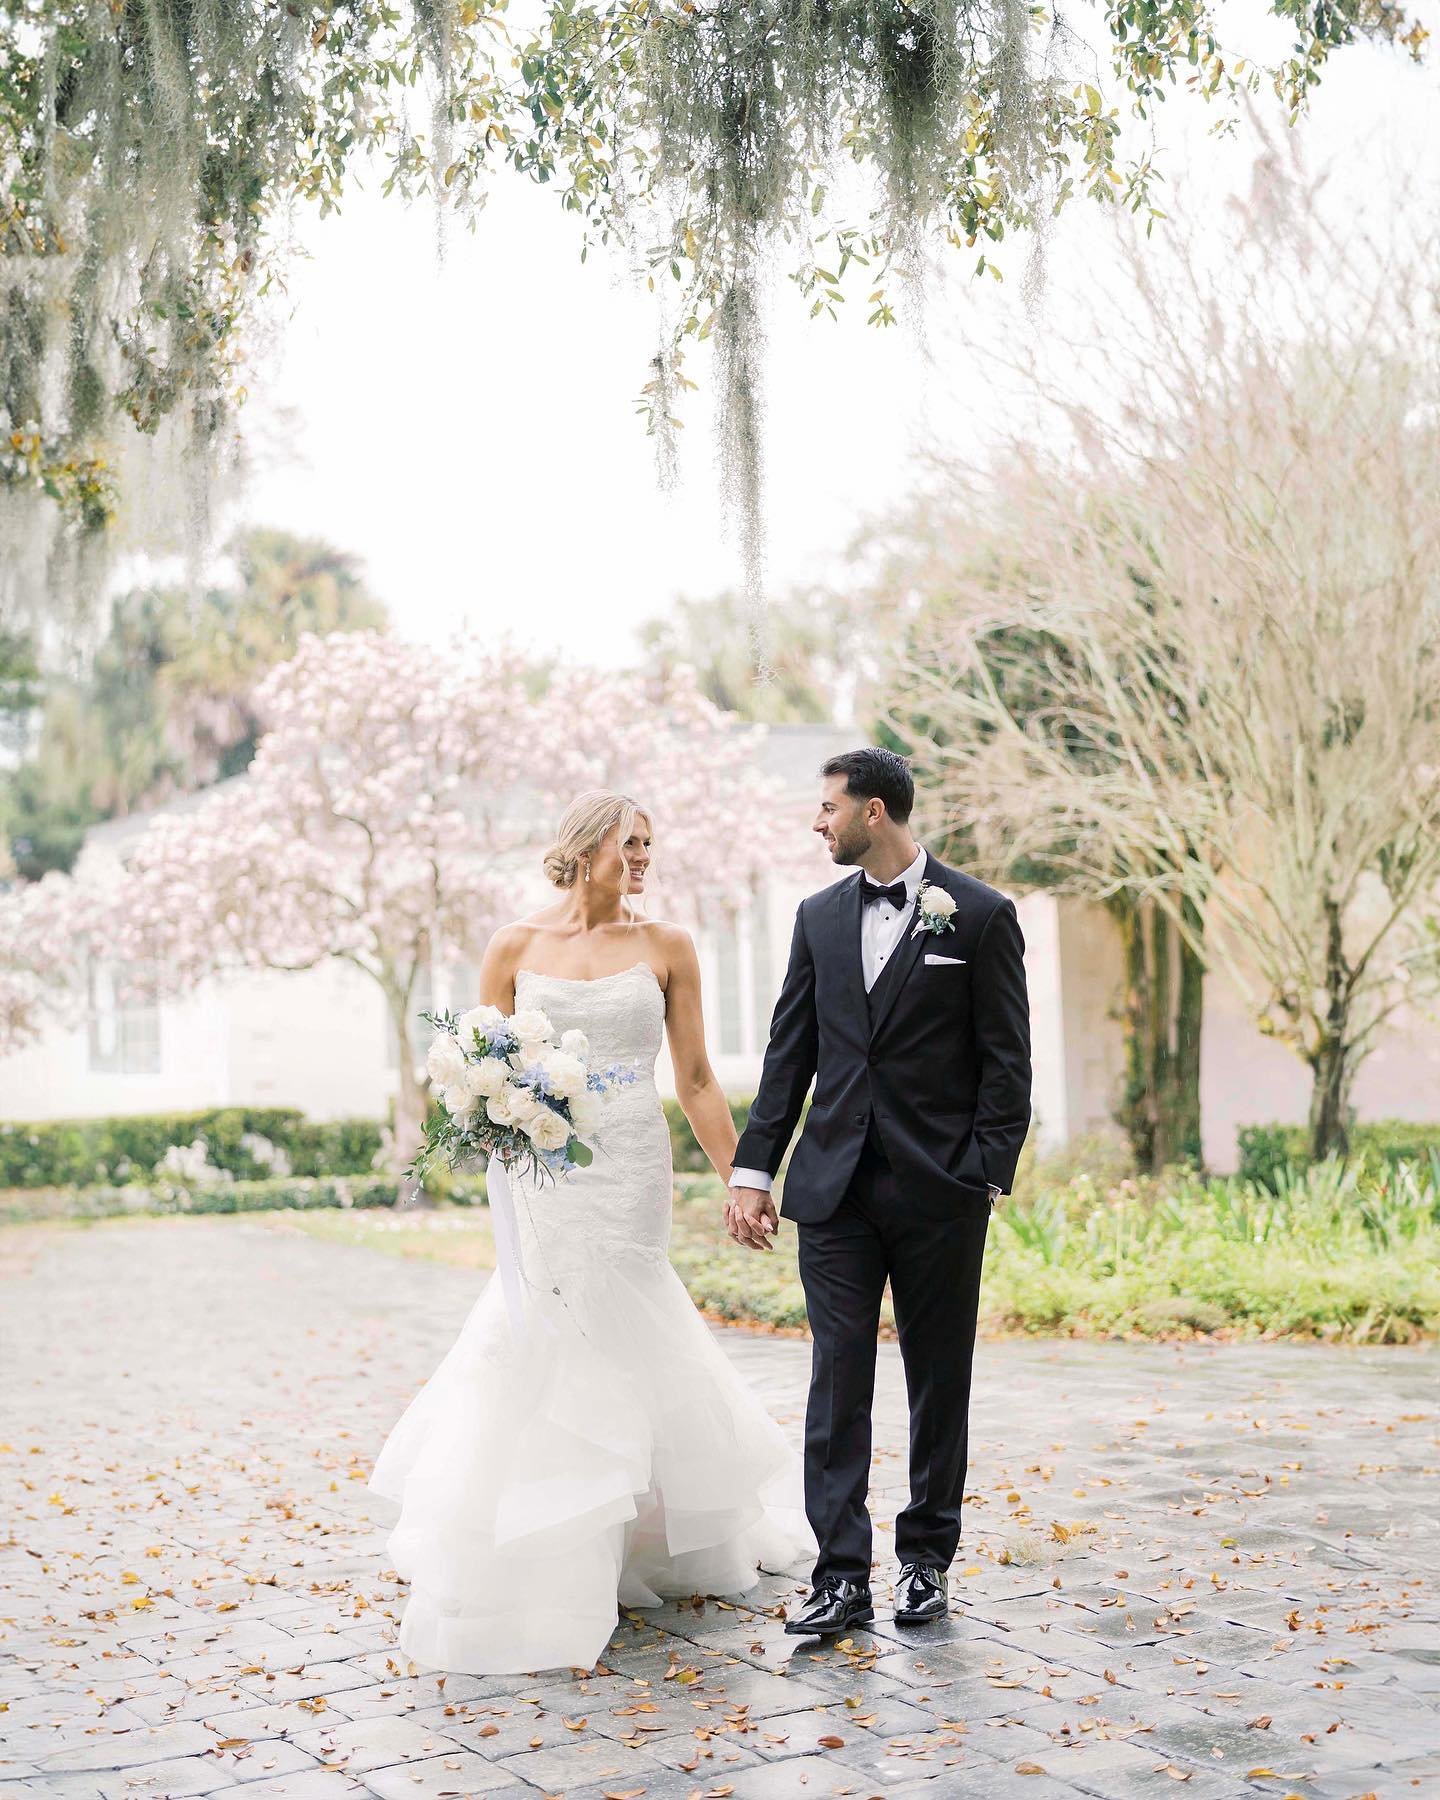 Despite one of stormiest days in February, Katie and Dom fully embraced the rain and trusted us to venture outside for some portraits. We worked quickly capturing them under the Spanish moss-draped trees at the stunning Azaleana Manor, and I'd say it